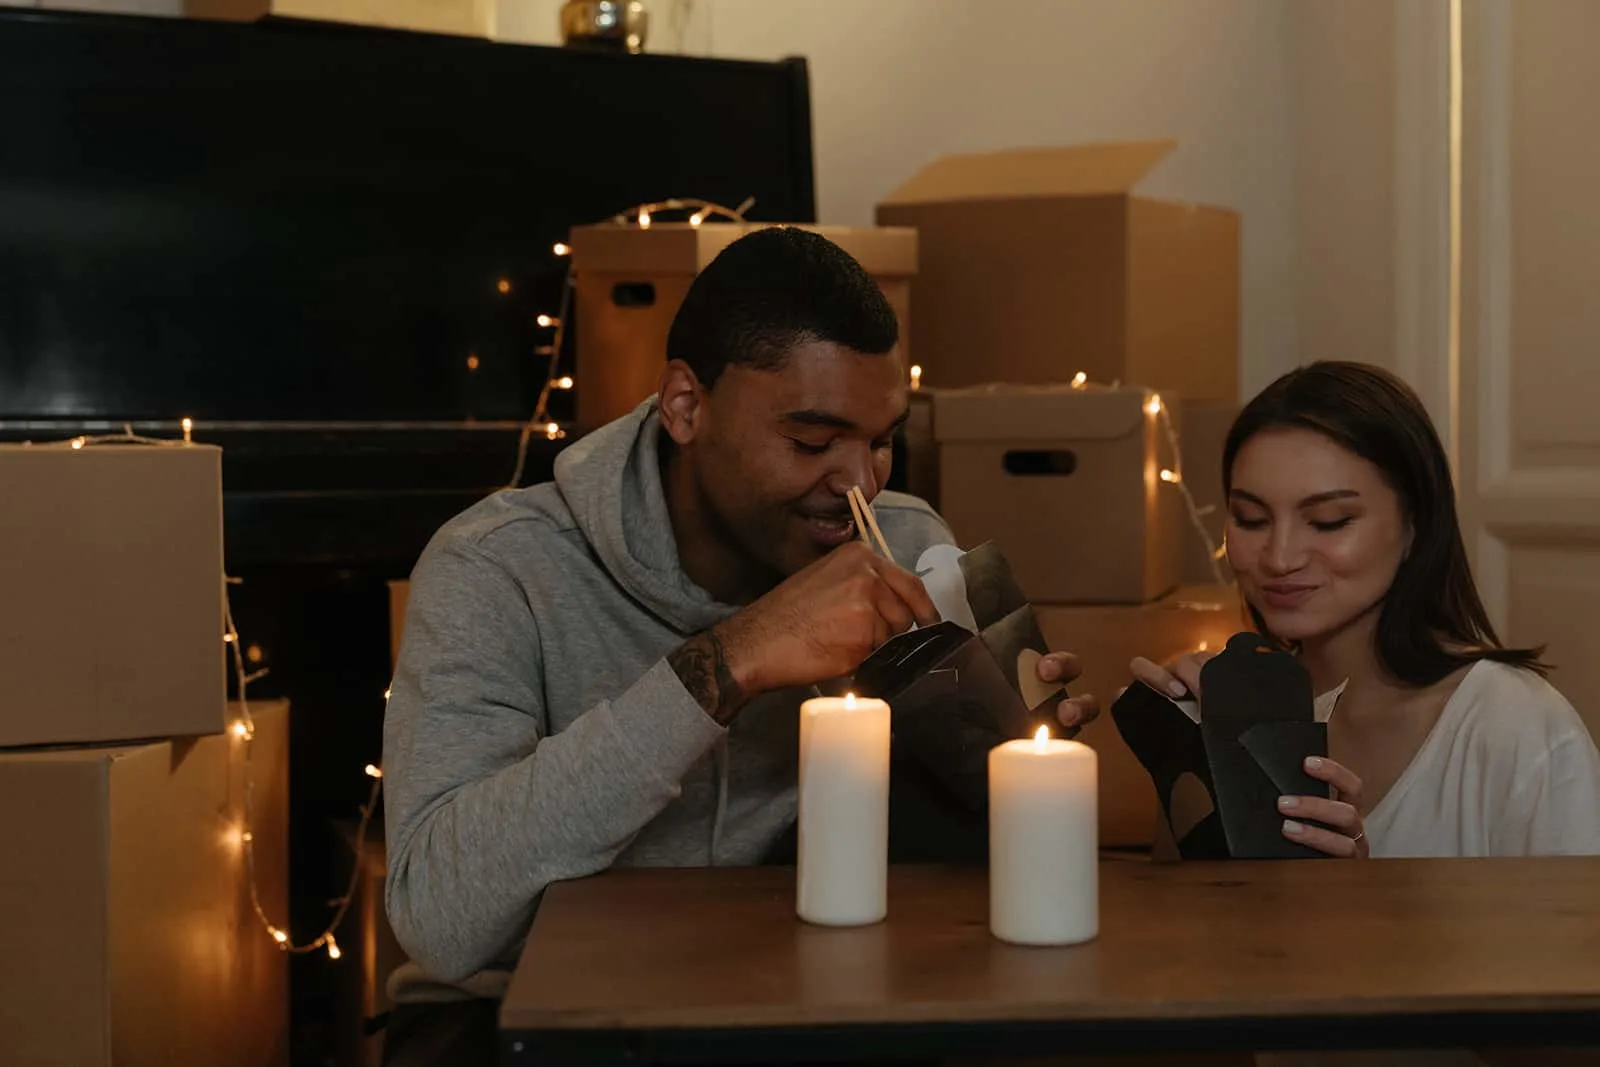 a couple having a romantic evening with candles at home eating Chinese food